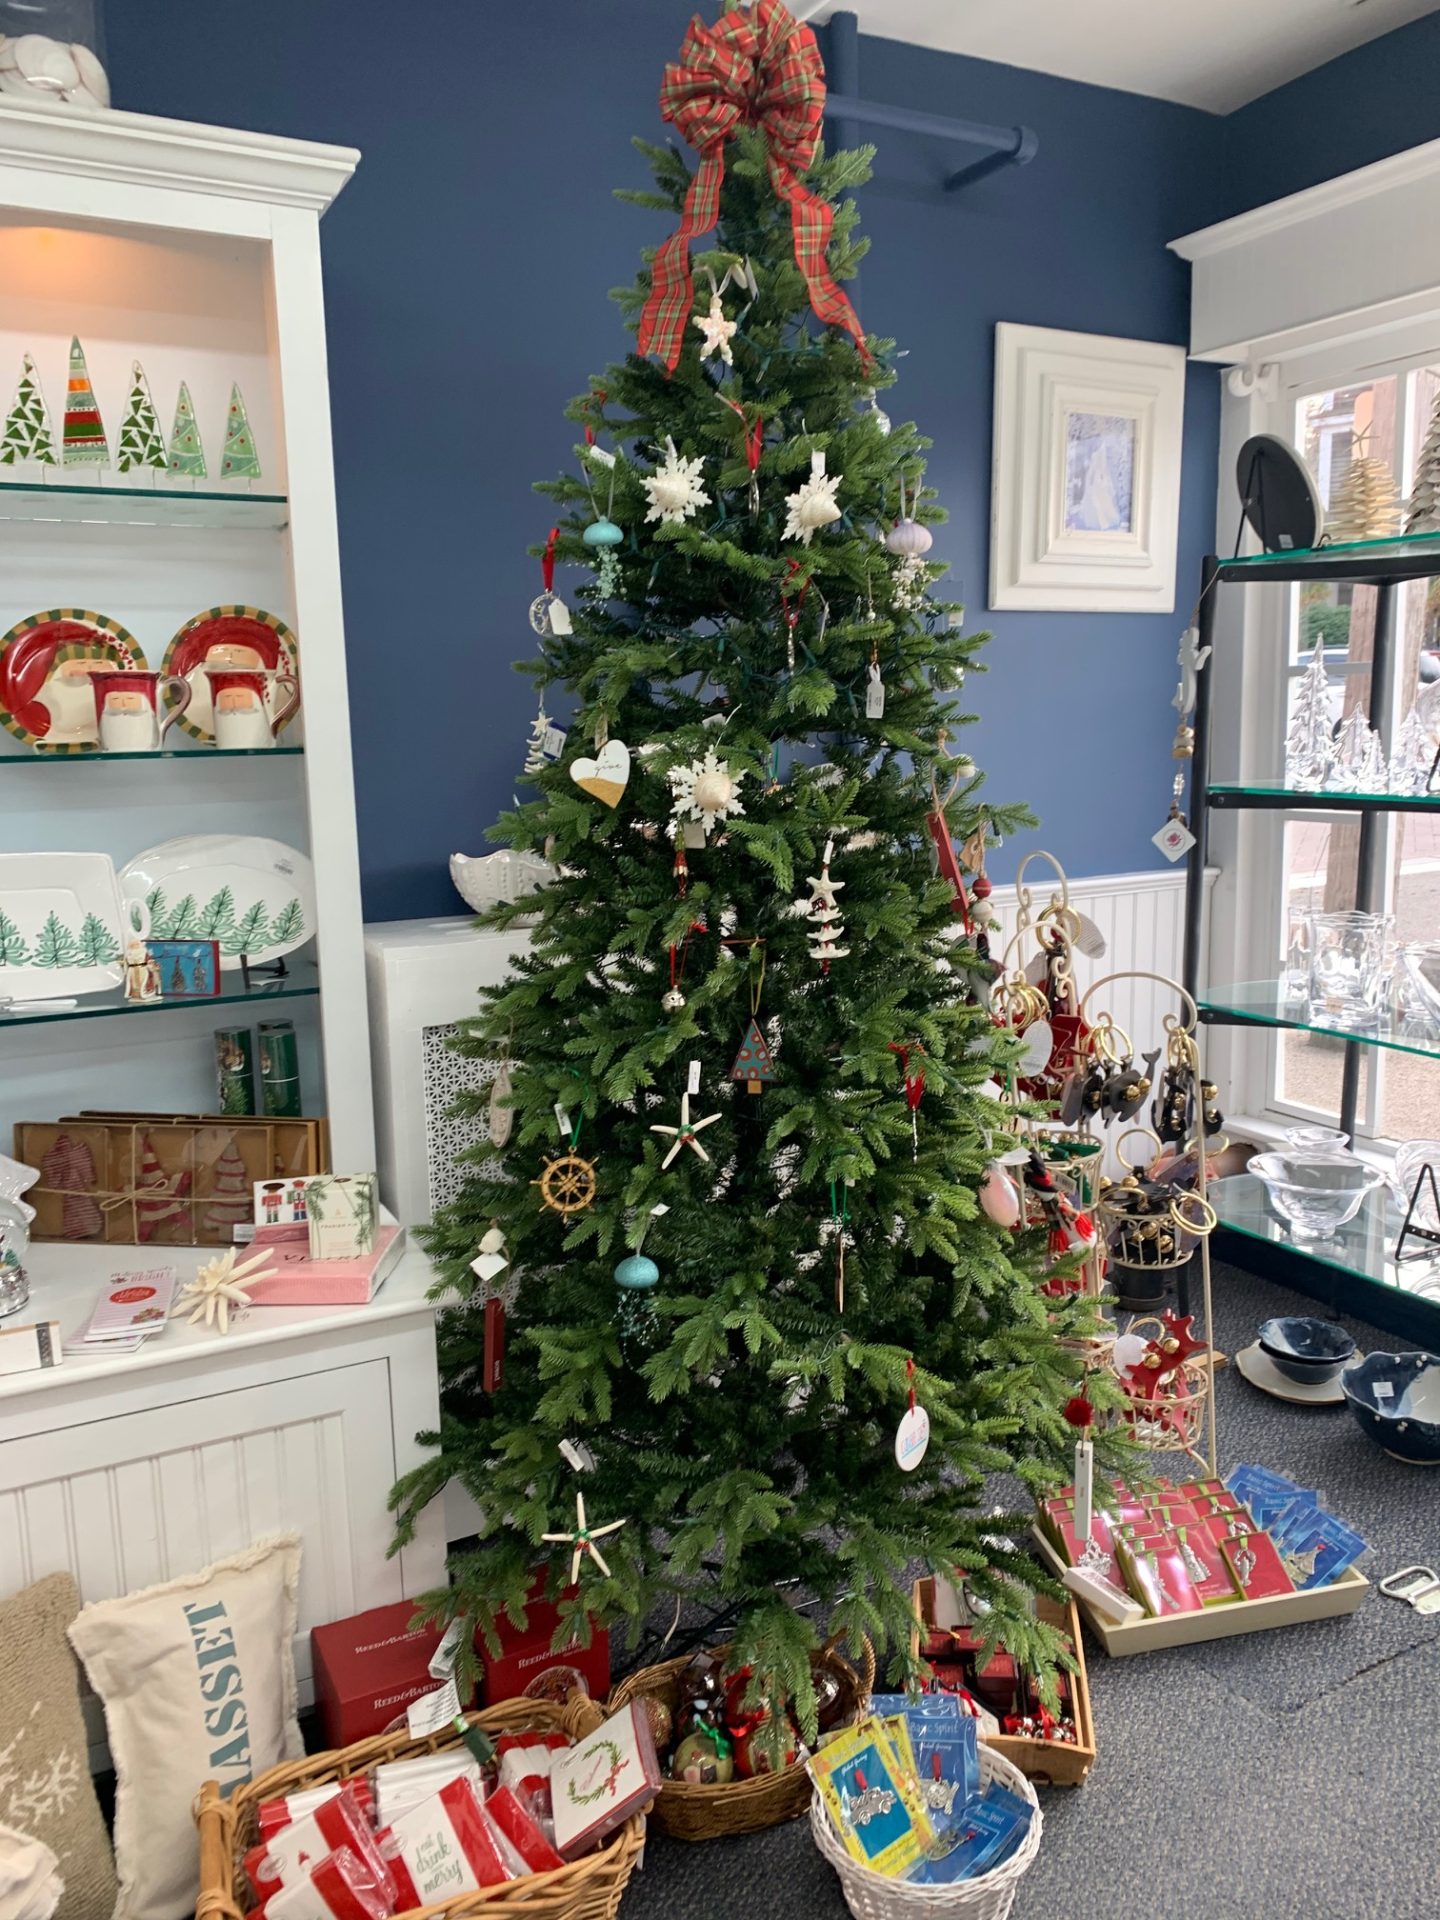 South Shore Massachusetts Small Business Holiday Giveaway Spotlights